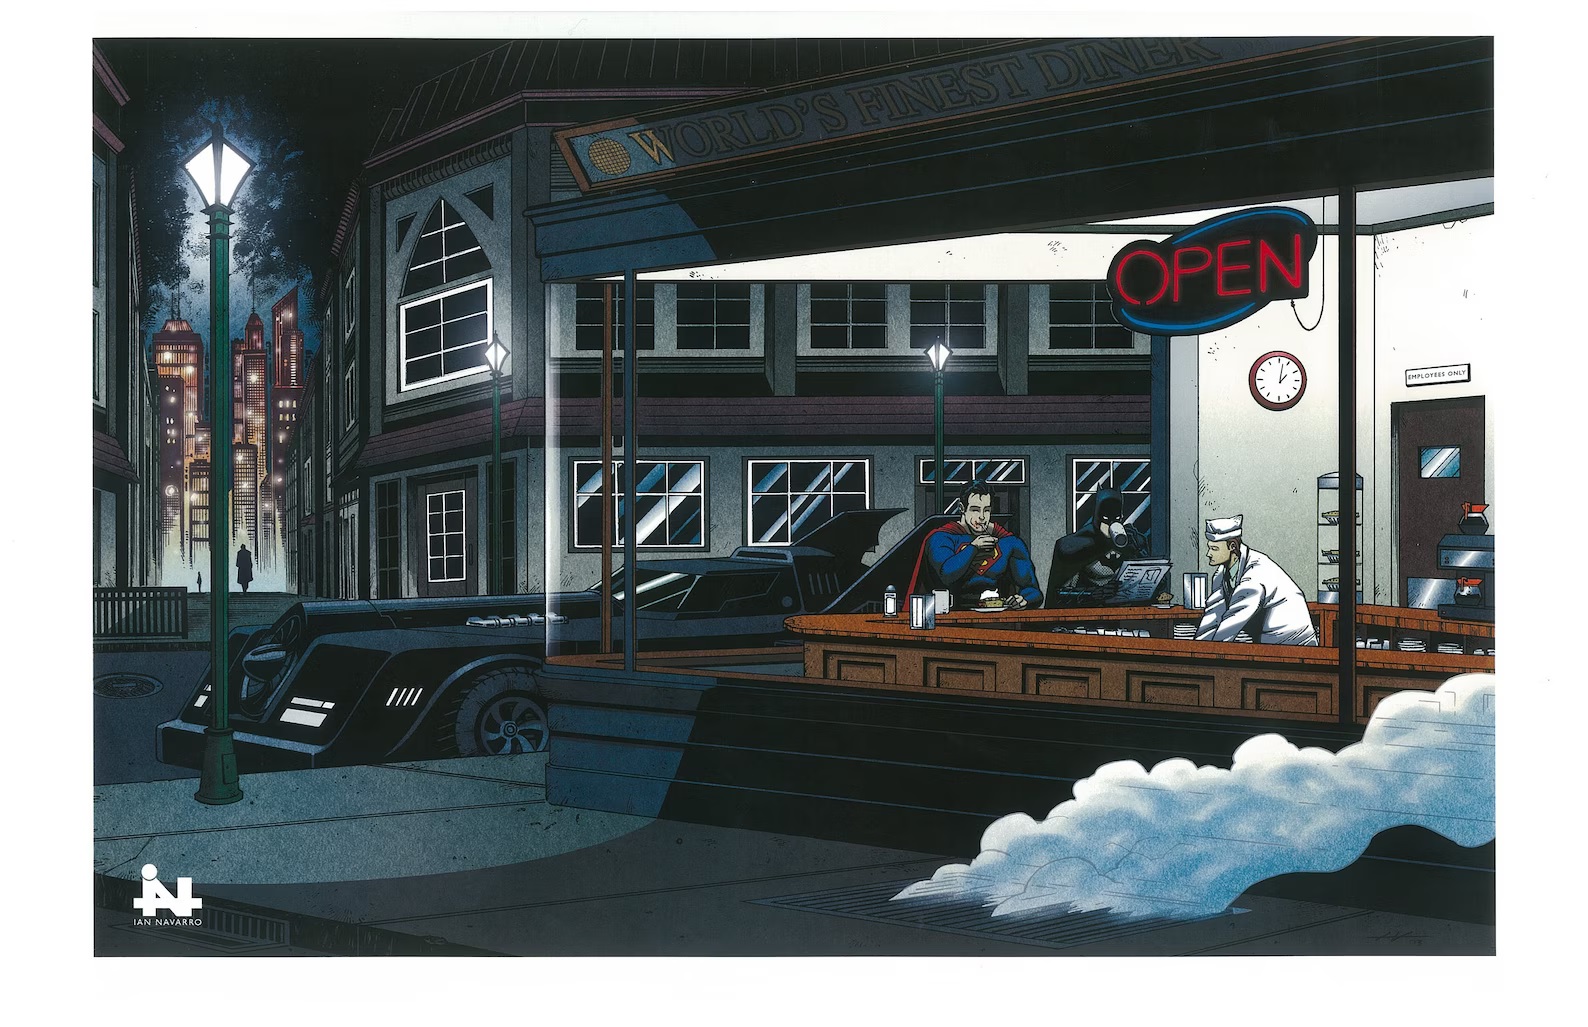 A riff on Edward Hopper's "Nighthawks," featuring Superman and Batman in the diner with the Batmobile parked outside